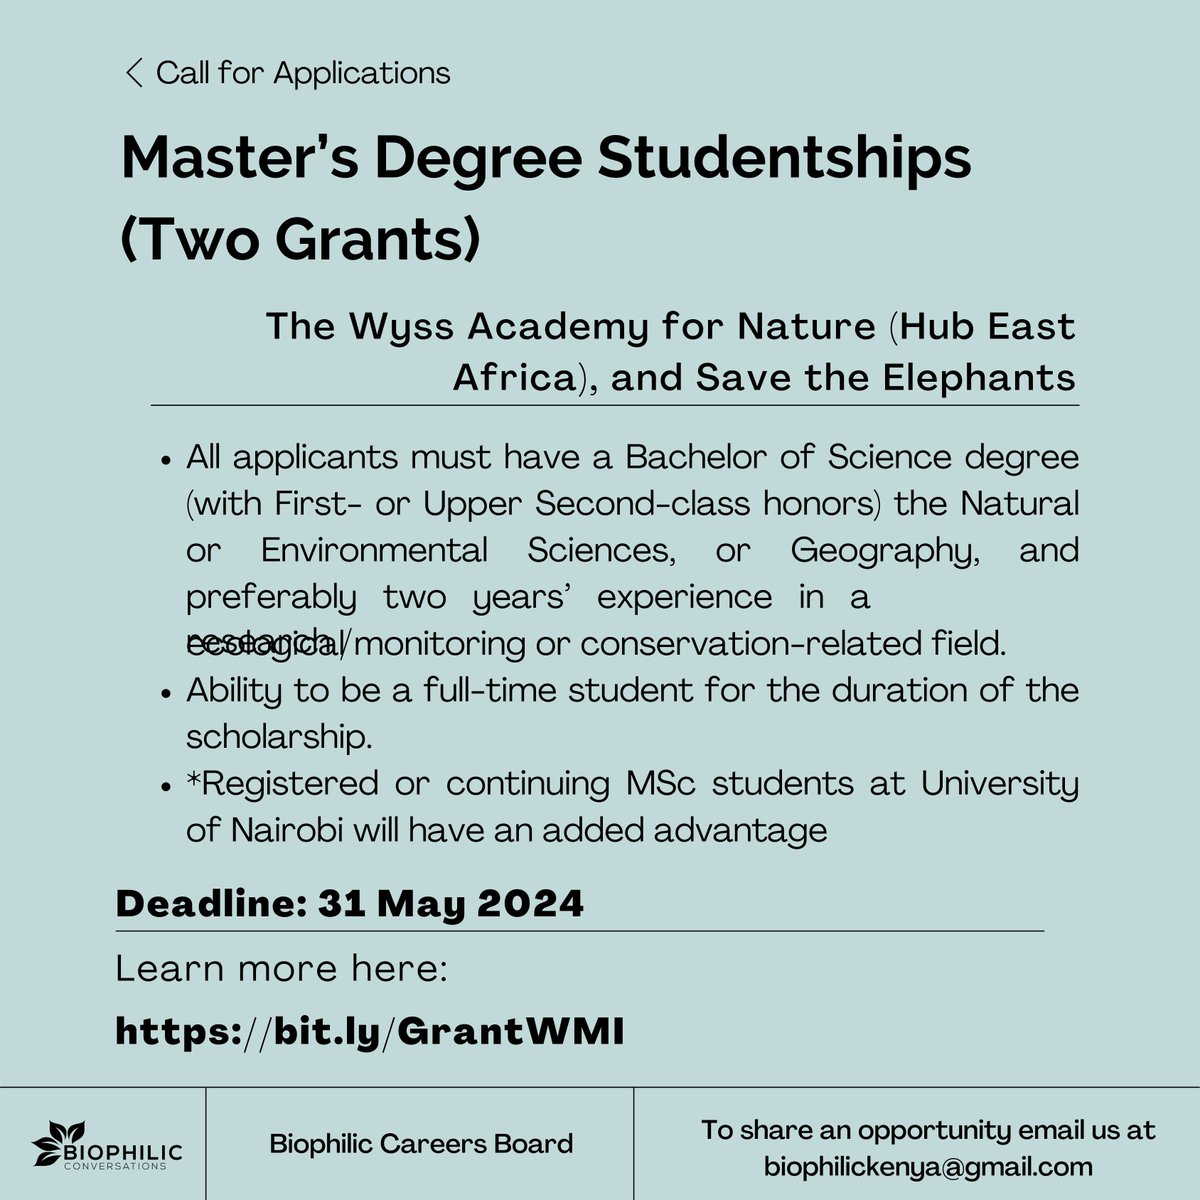 Exciting Opportunity Alert! TWO Master’s Degree Studentships for 2024! 🗓️May 31st, 2024 🔗 bit.ly/GrantWMI #BiophilicCareersBoard